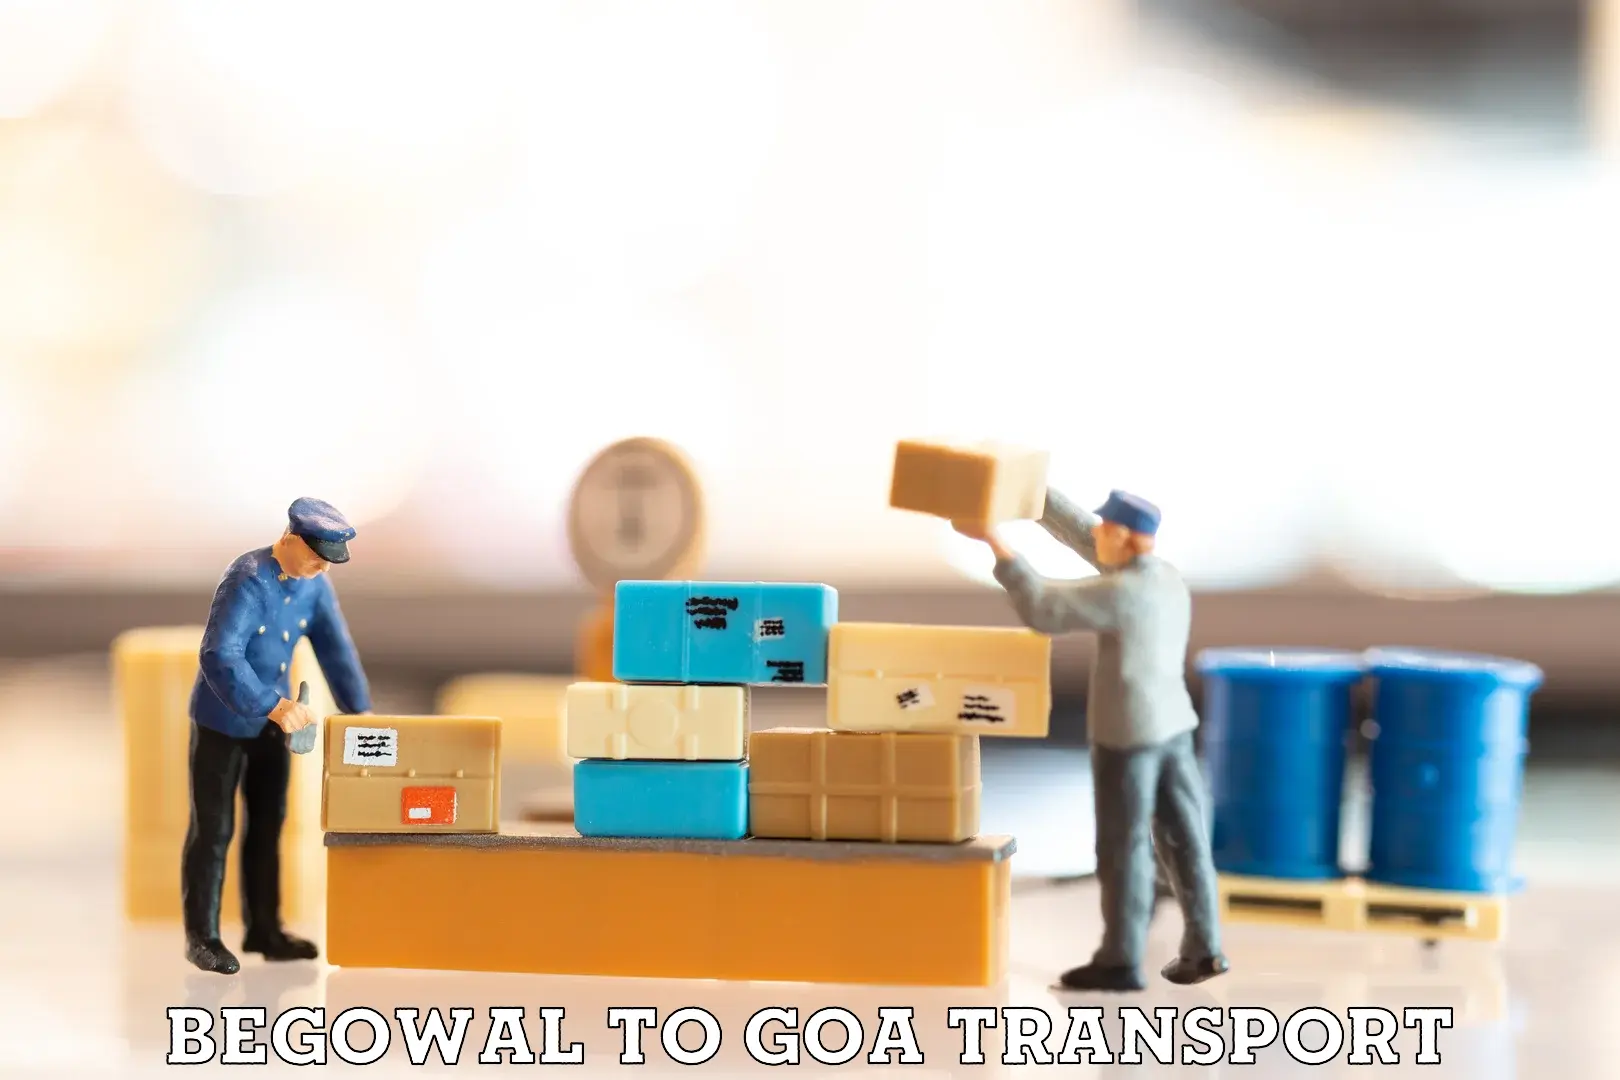 All India transport service Begowal to Ponda